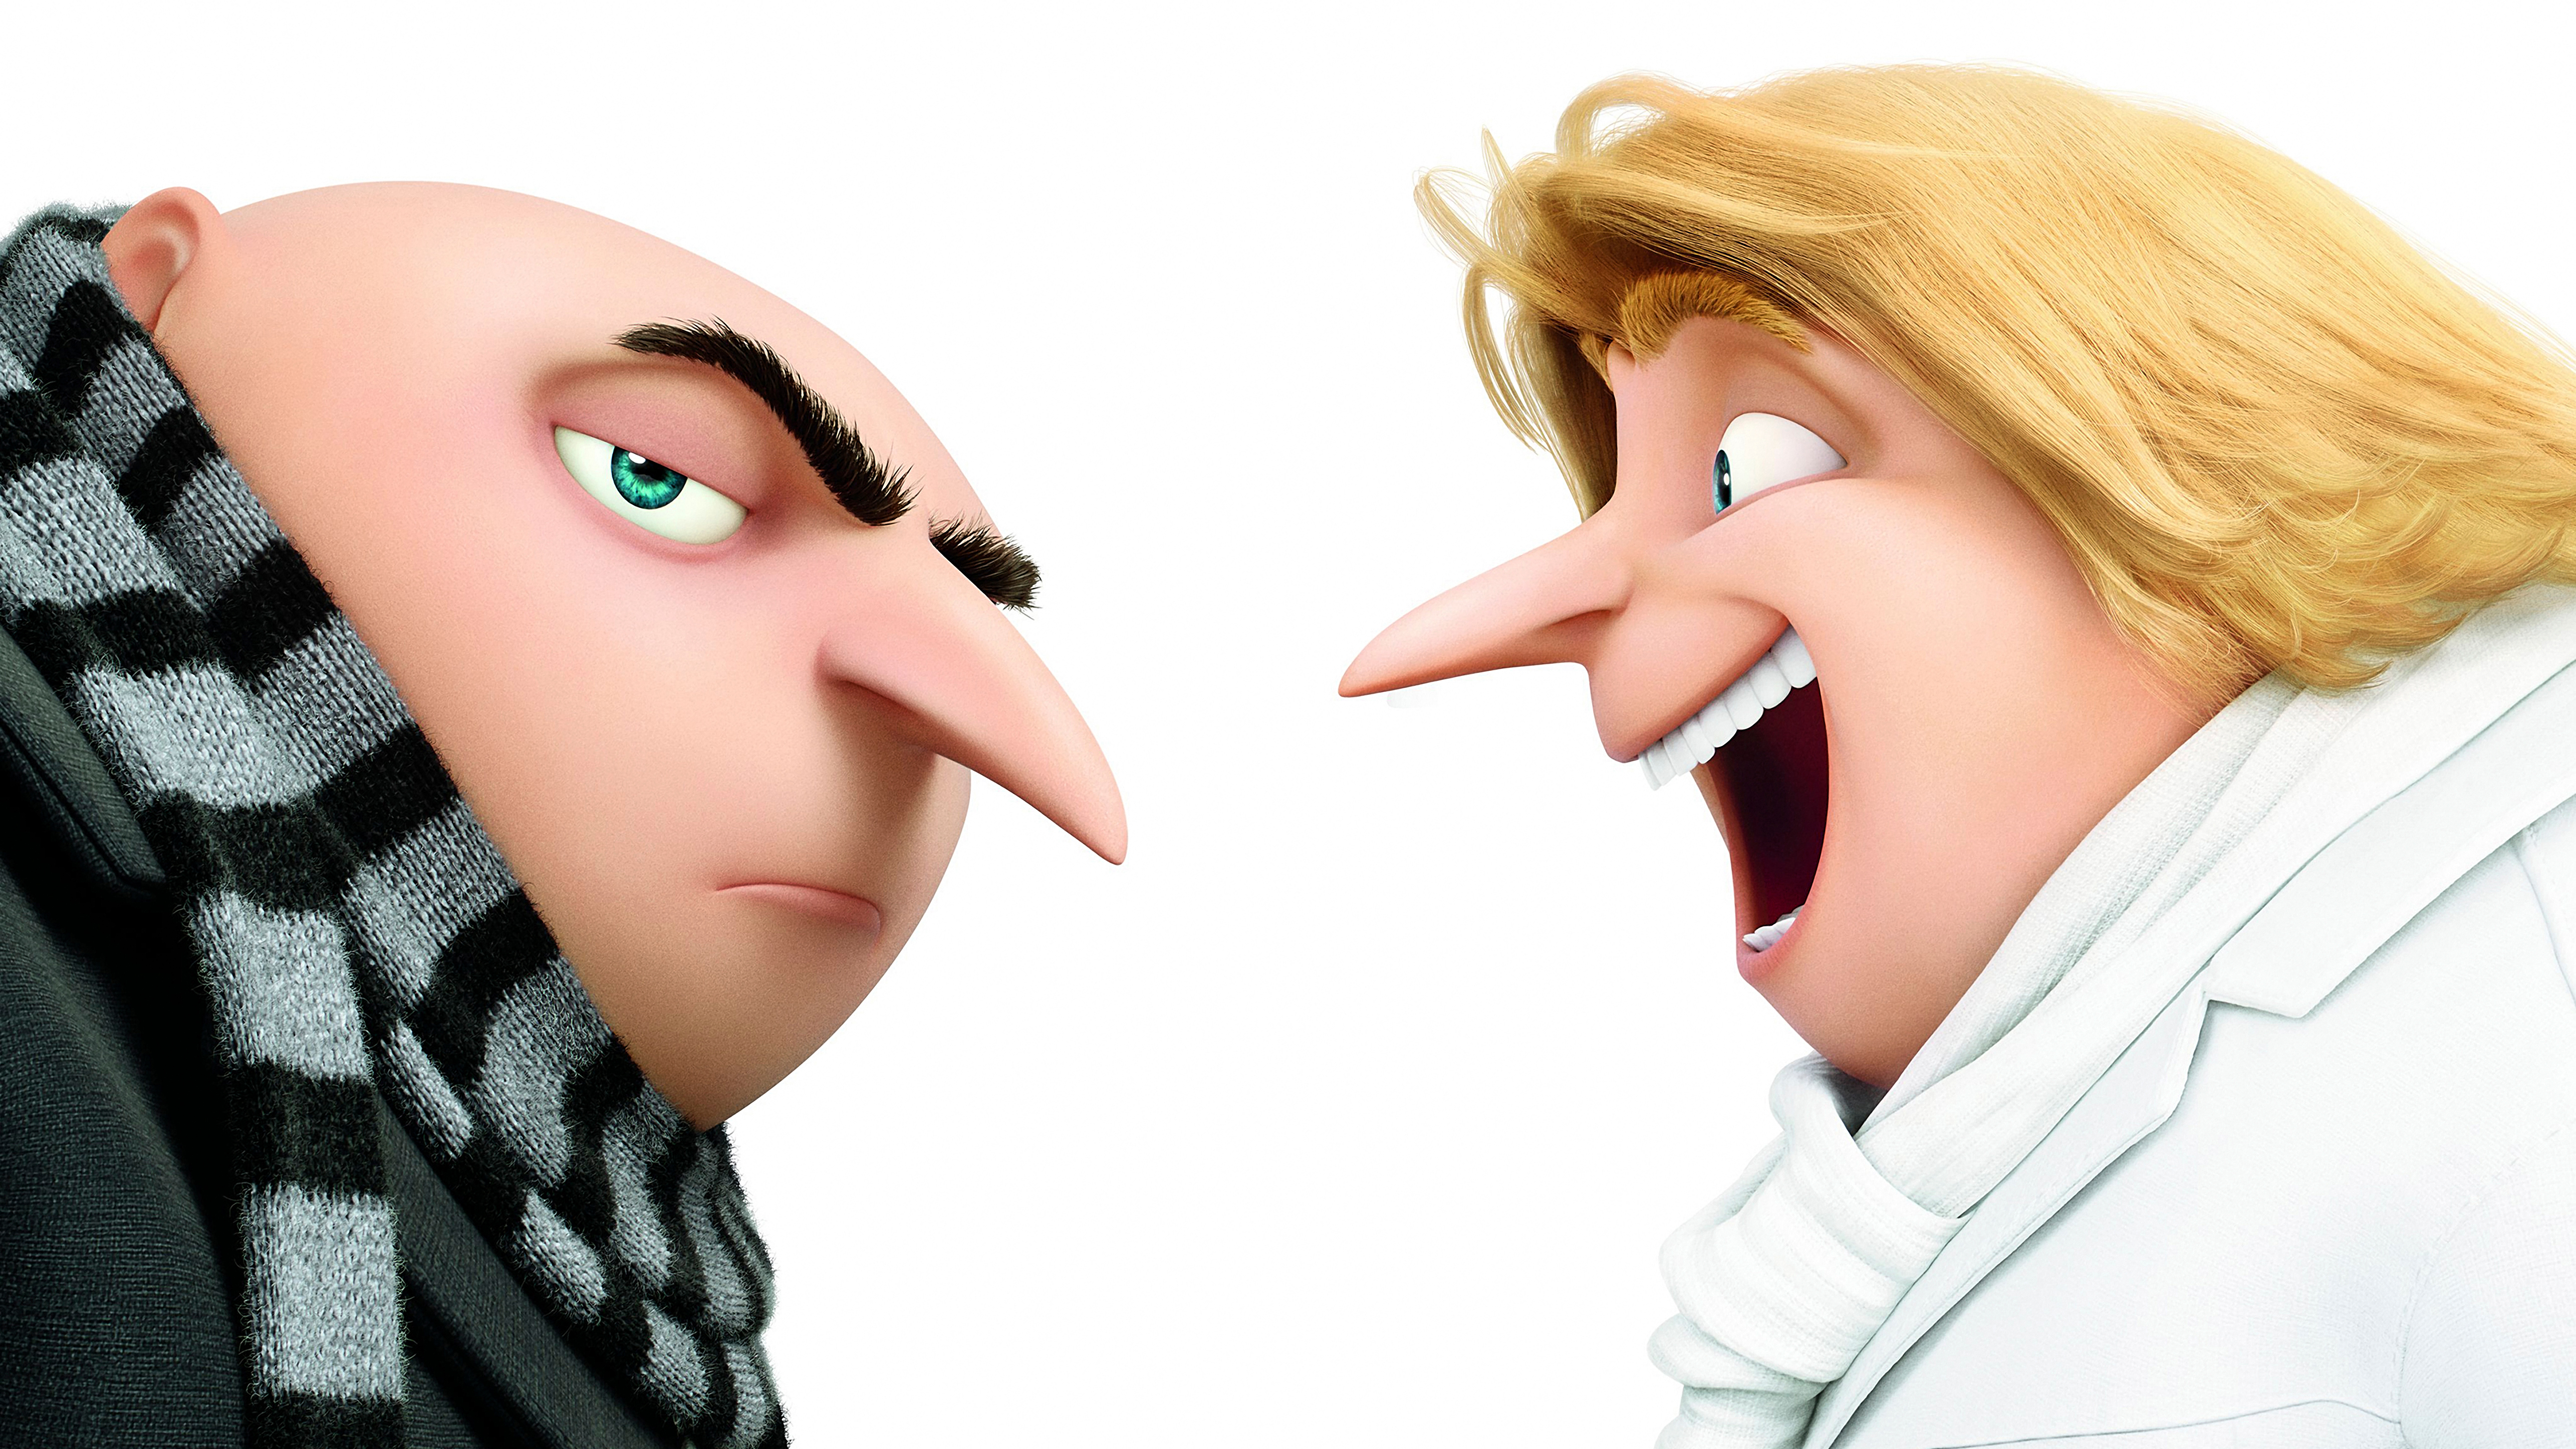 Movie Despicable Me 3 HD Wallpaper | Background Image